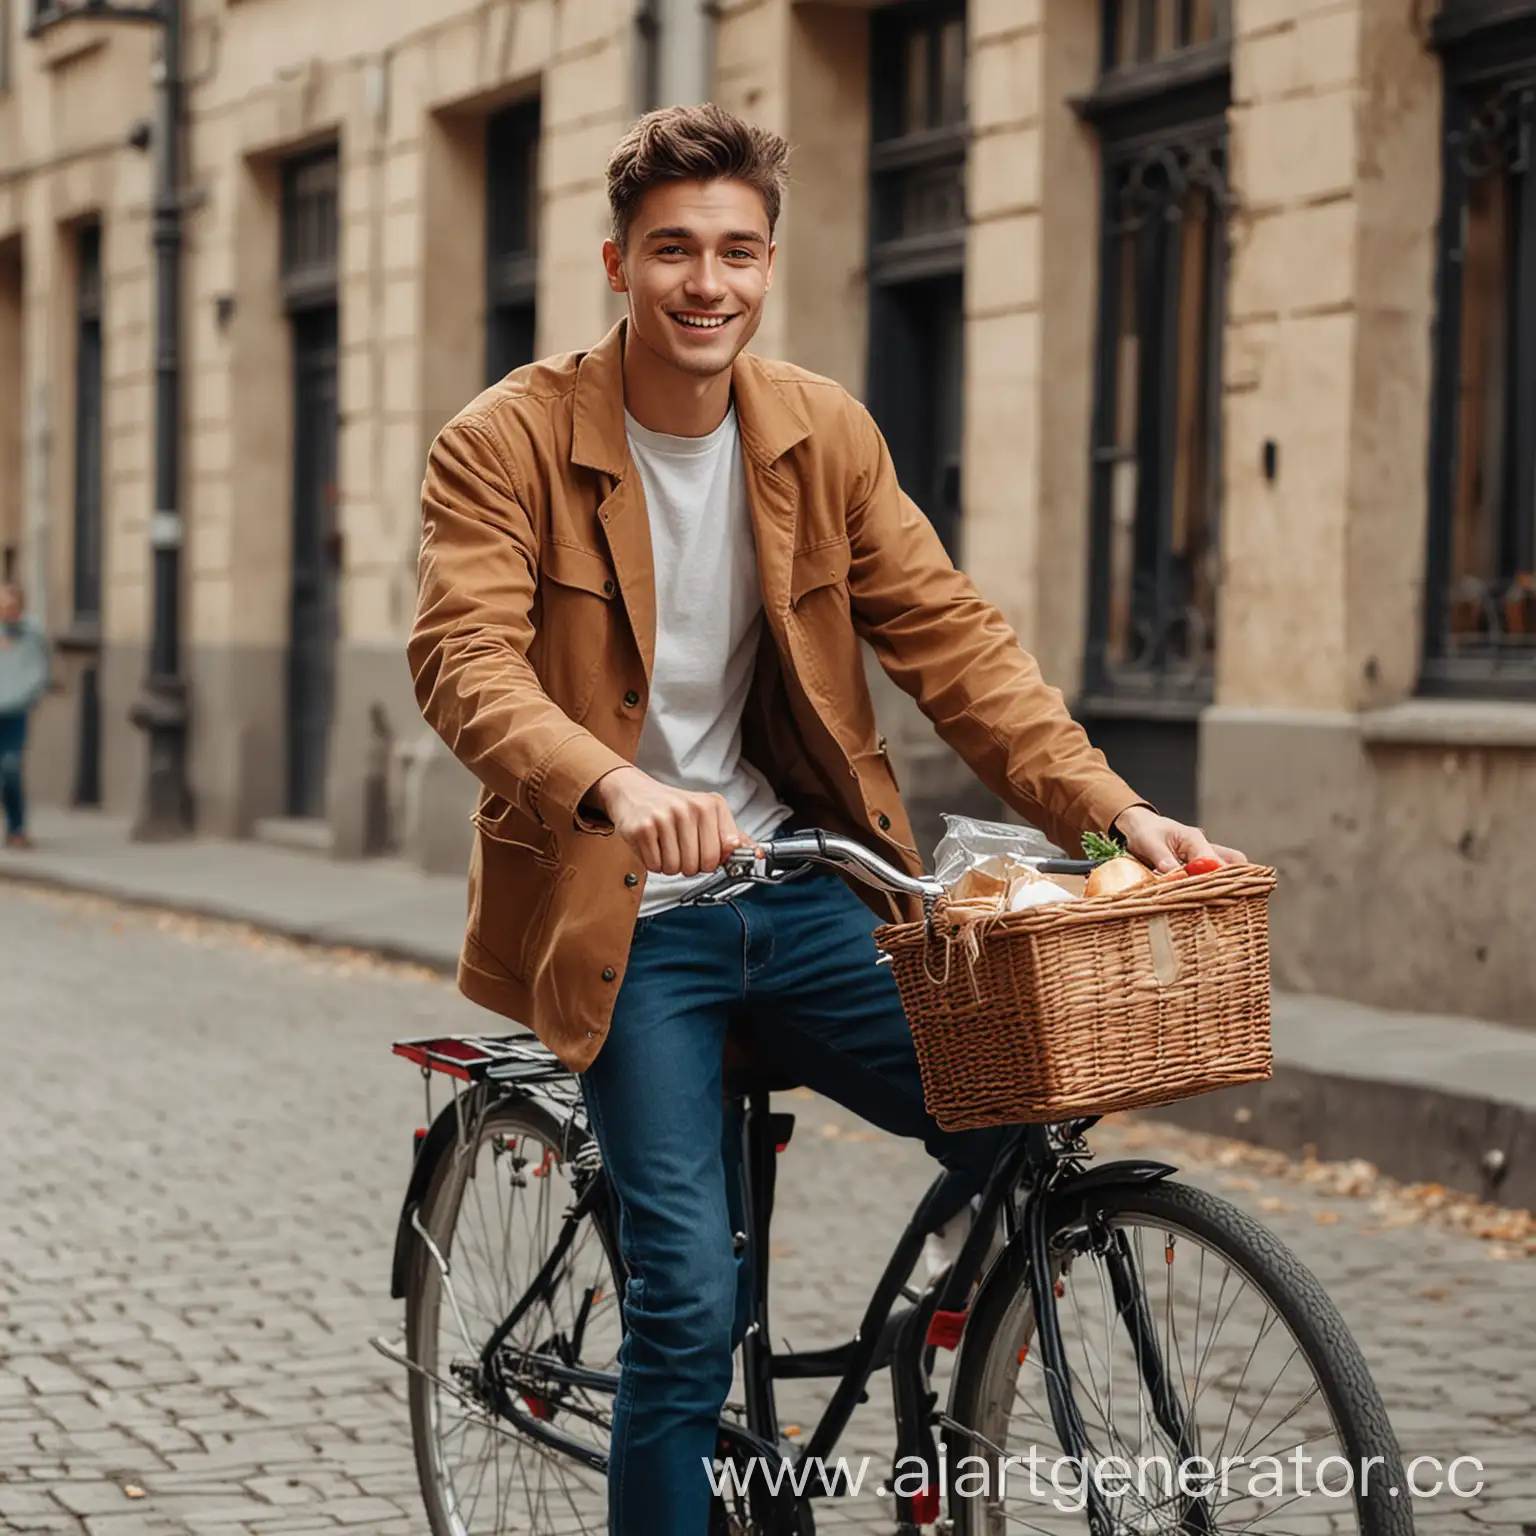 Urban-Food-Delivery-Handsome-Cyclist-Delivering-Orders